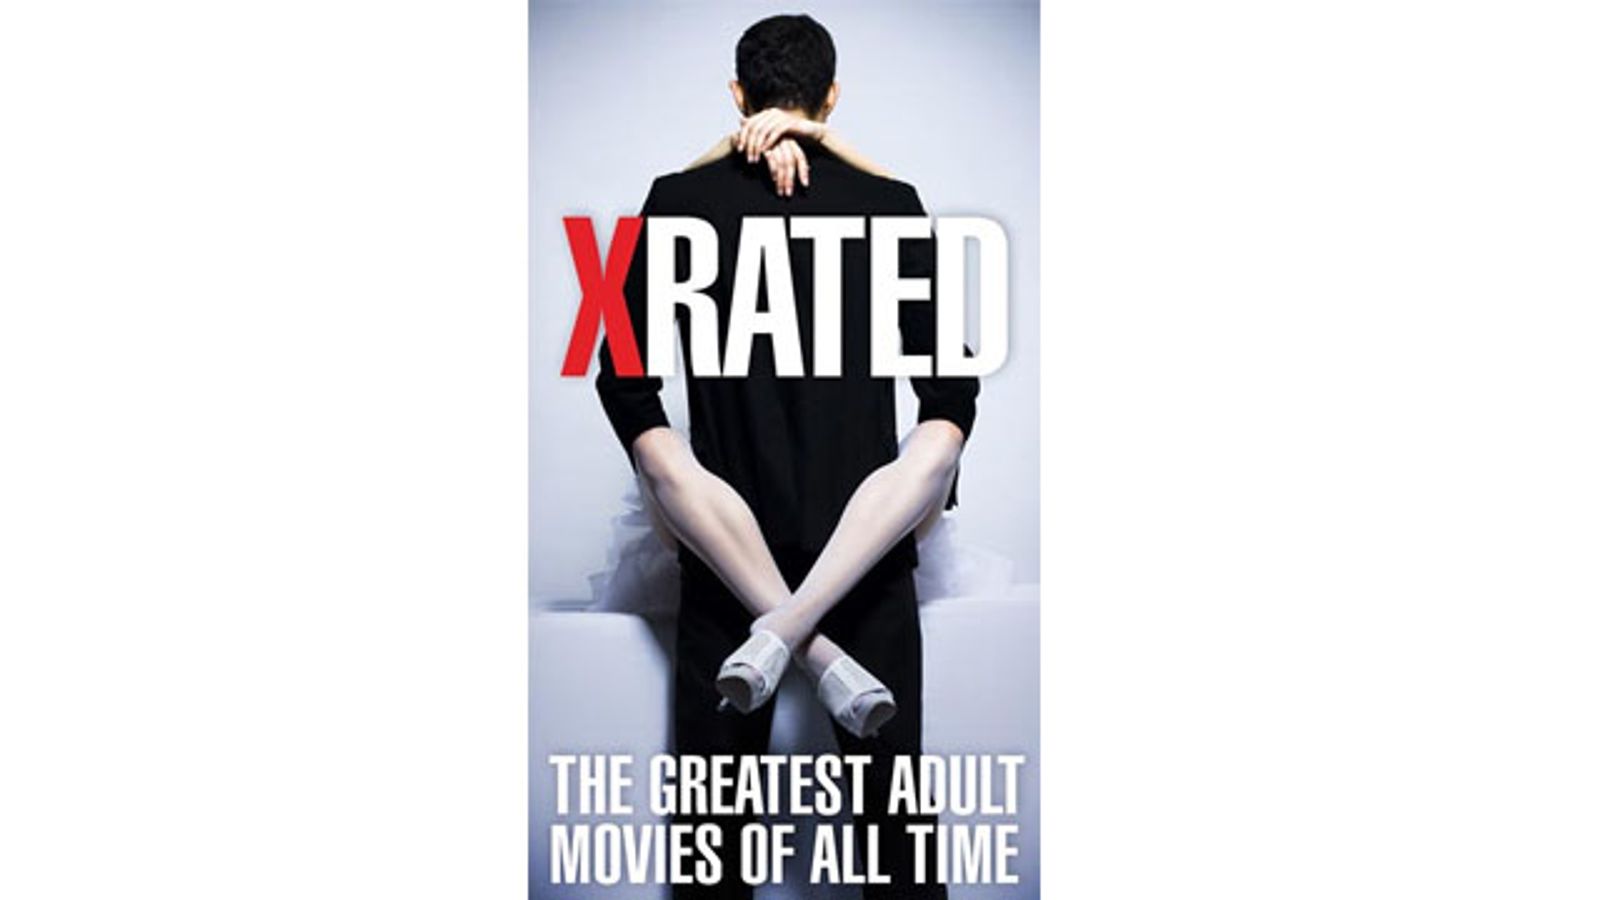 Plausible Films' 'X-Rated' to Premiere on Showtime Friday